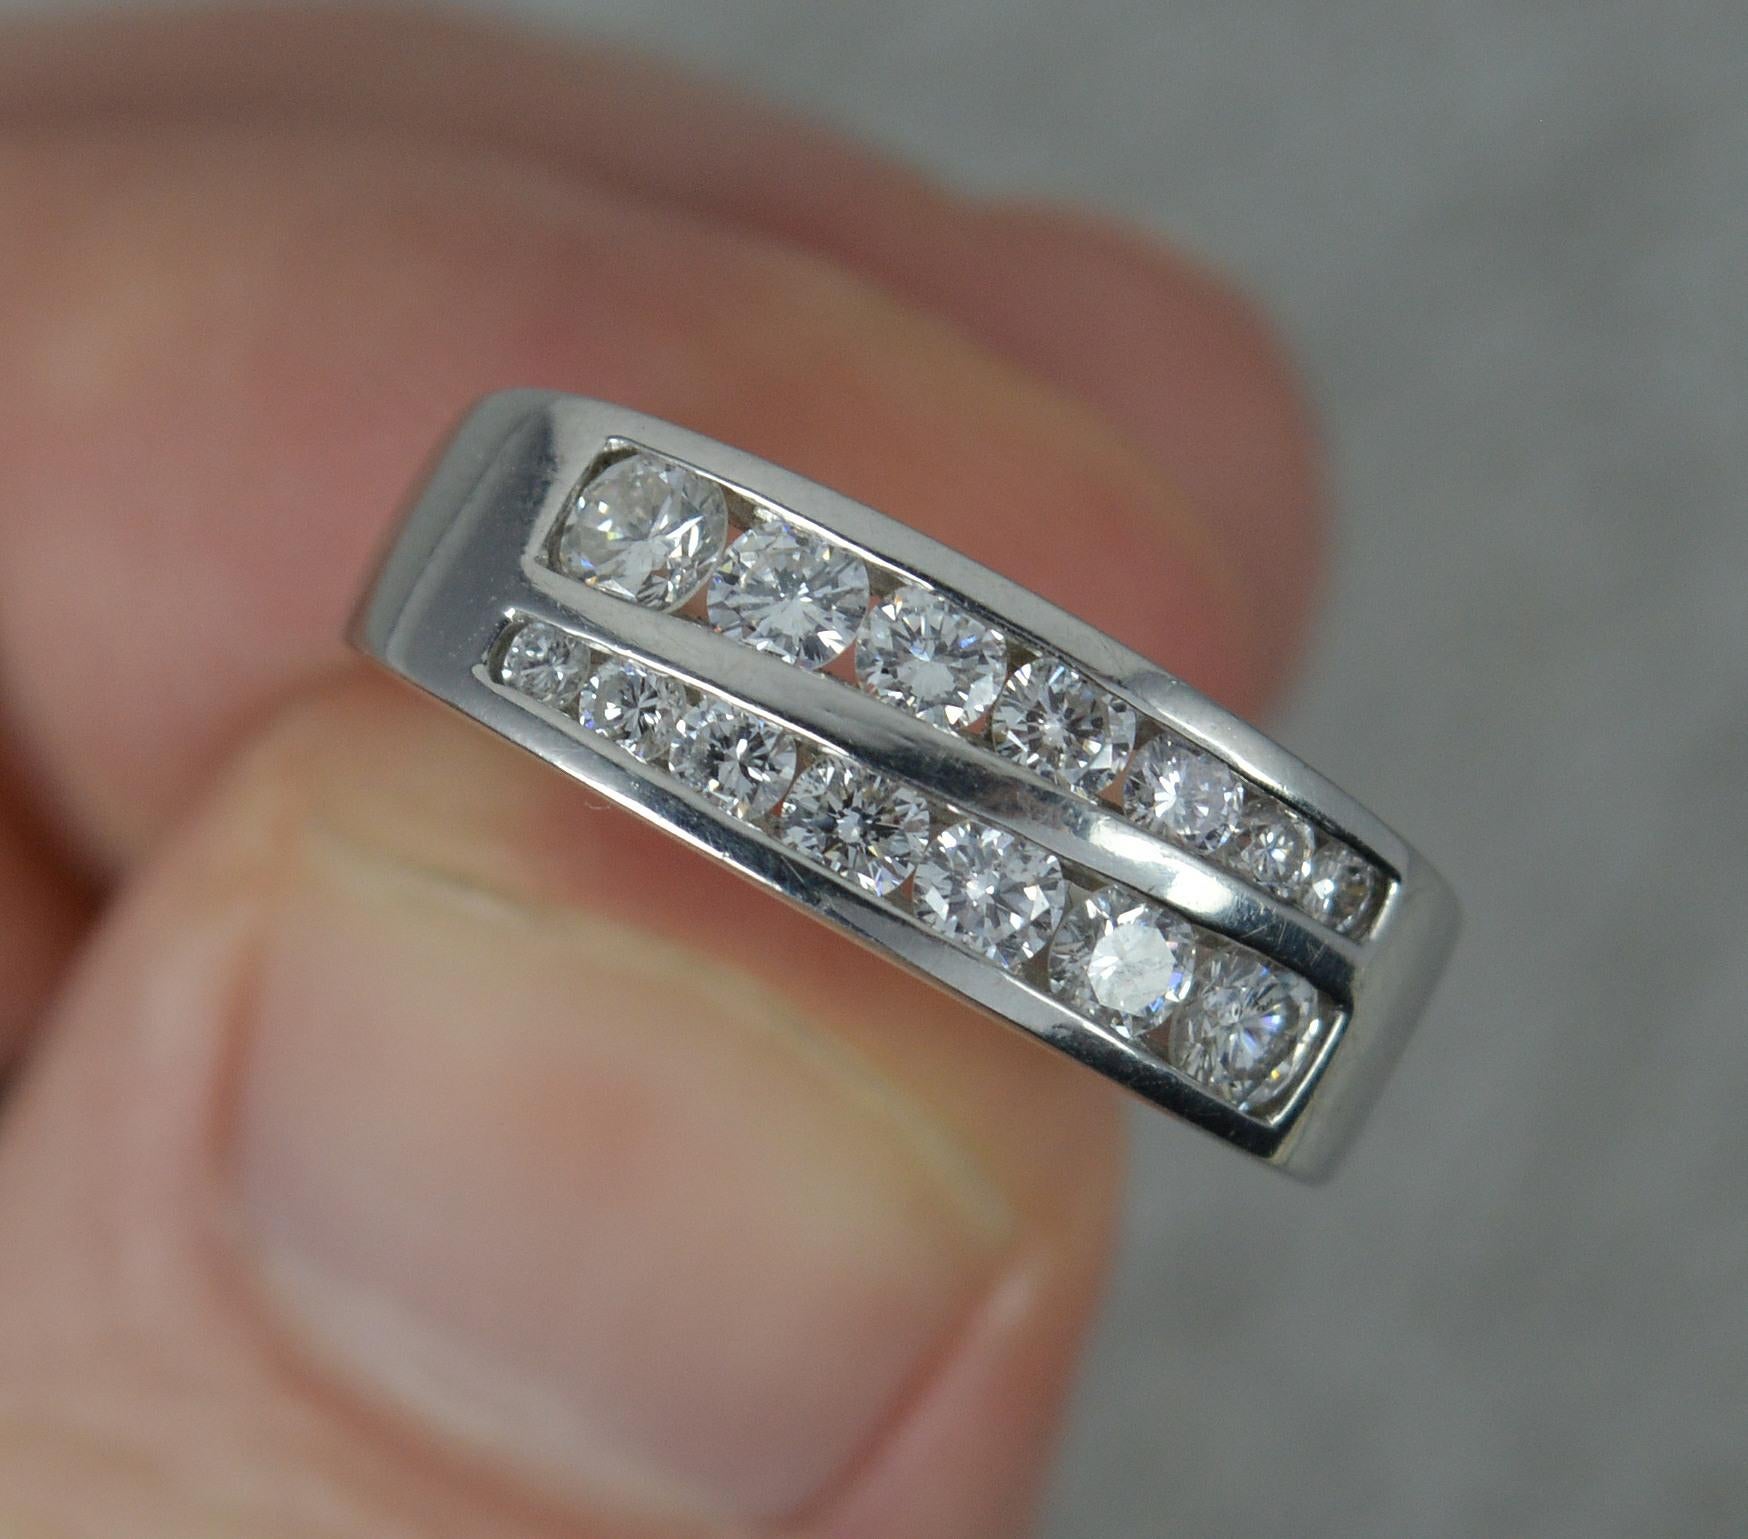 A Platinum and Diamond two row design stack ring.
​Designed with two rows of seven natural round brilliant cut diamonds. Graduated size to total 0.6 carats approx. Very clean, white and sparkly.
15mm spread of stones, 6.1mm wide band, protruding